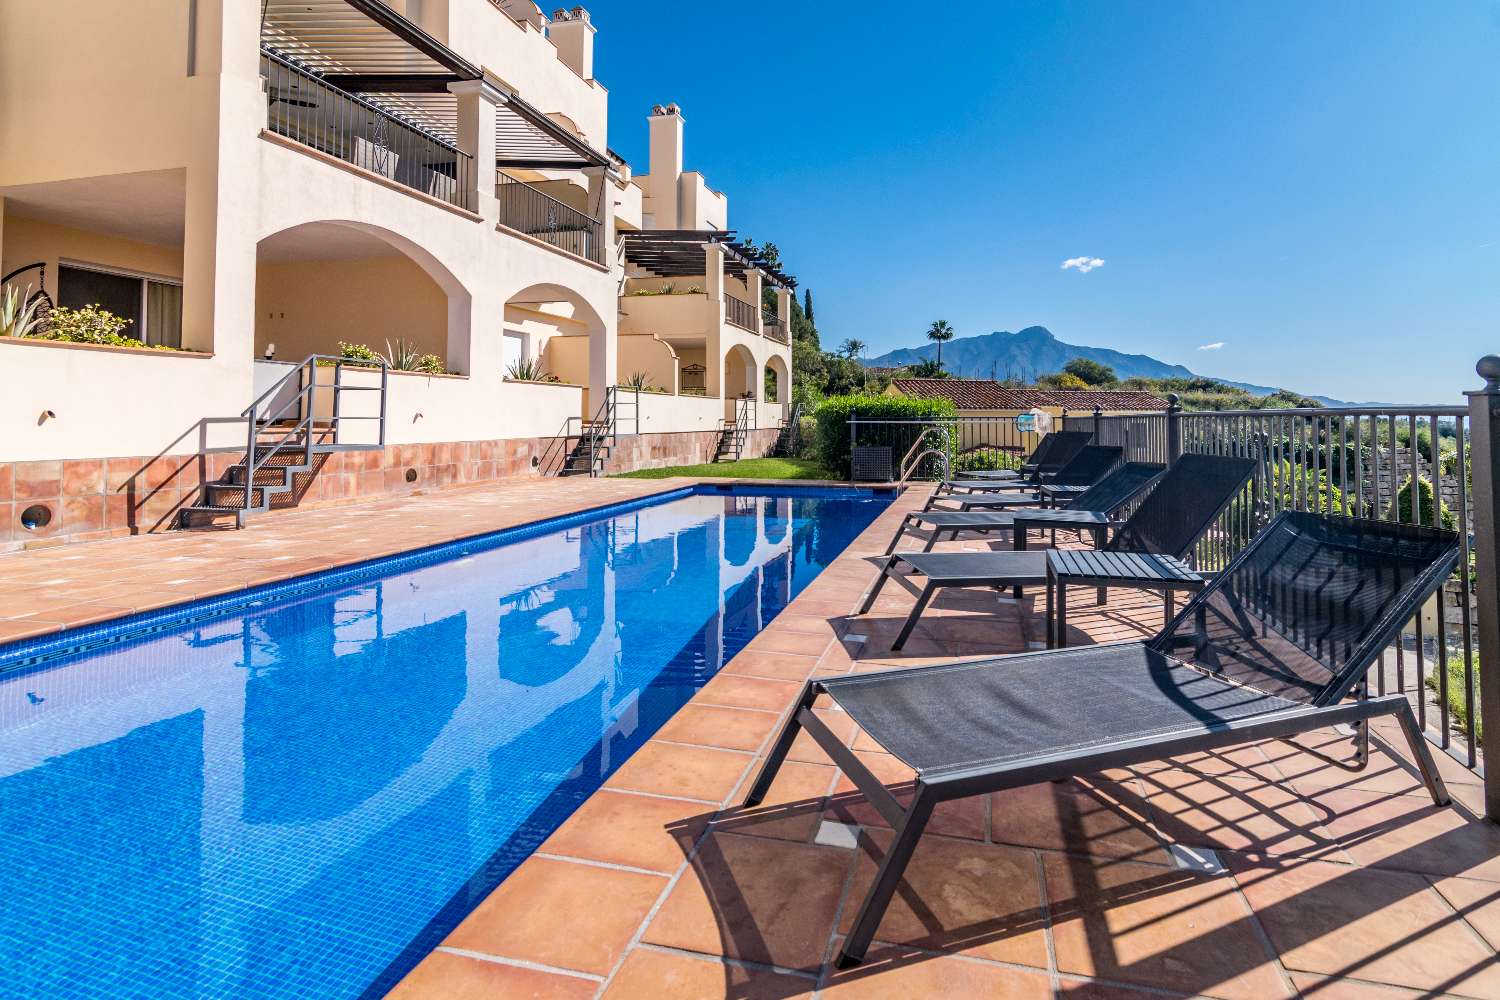 Beautiful duplex penthouse in Benahavís facing south with stunning views of the Mediterranean